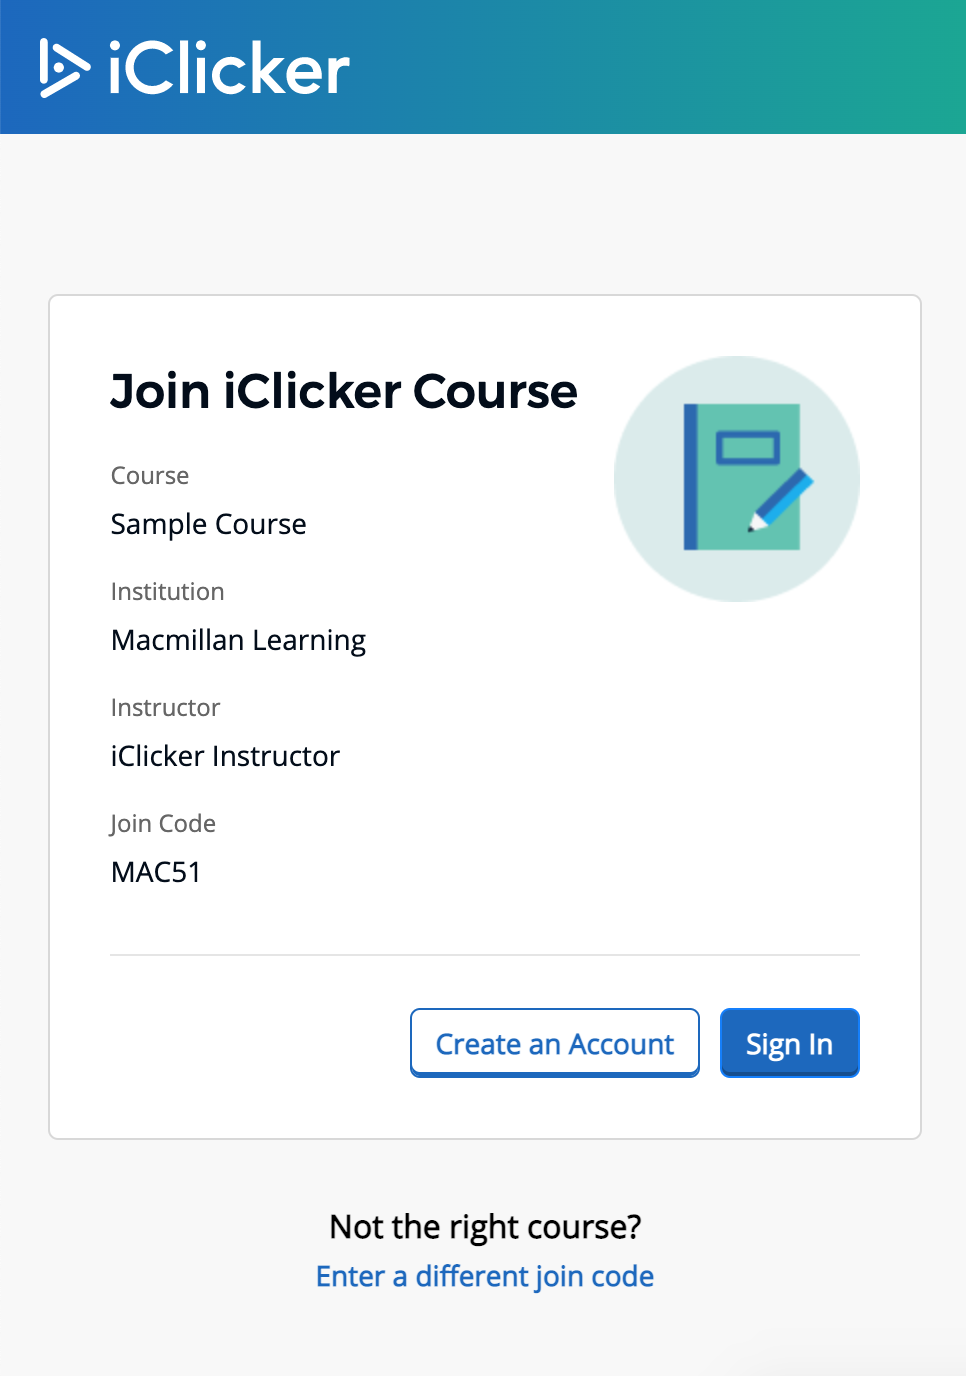 How to Add an Instructor's Course in the iClicker Student App